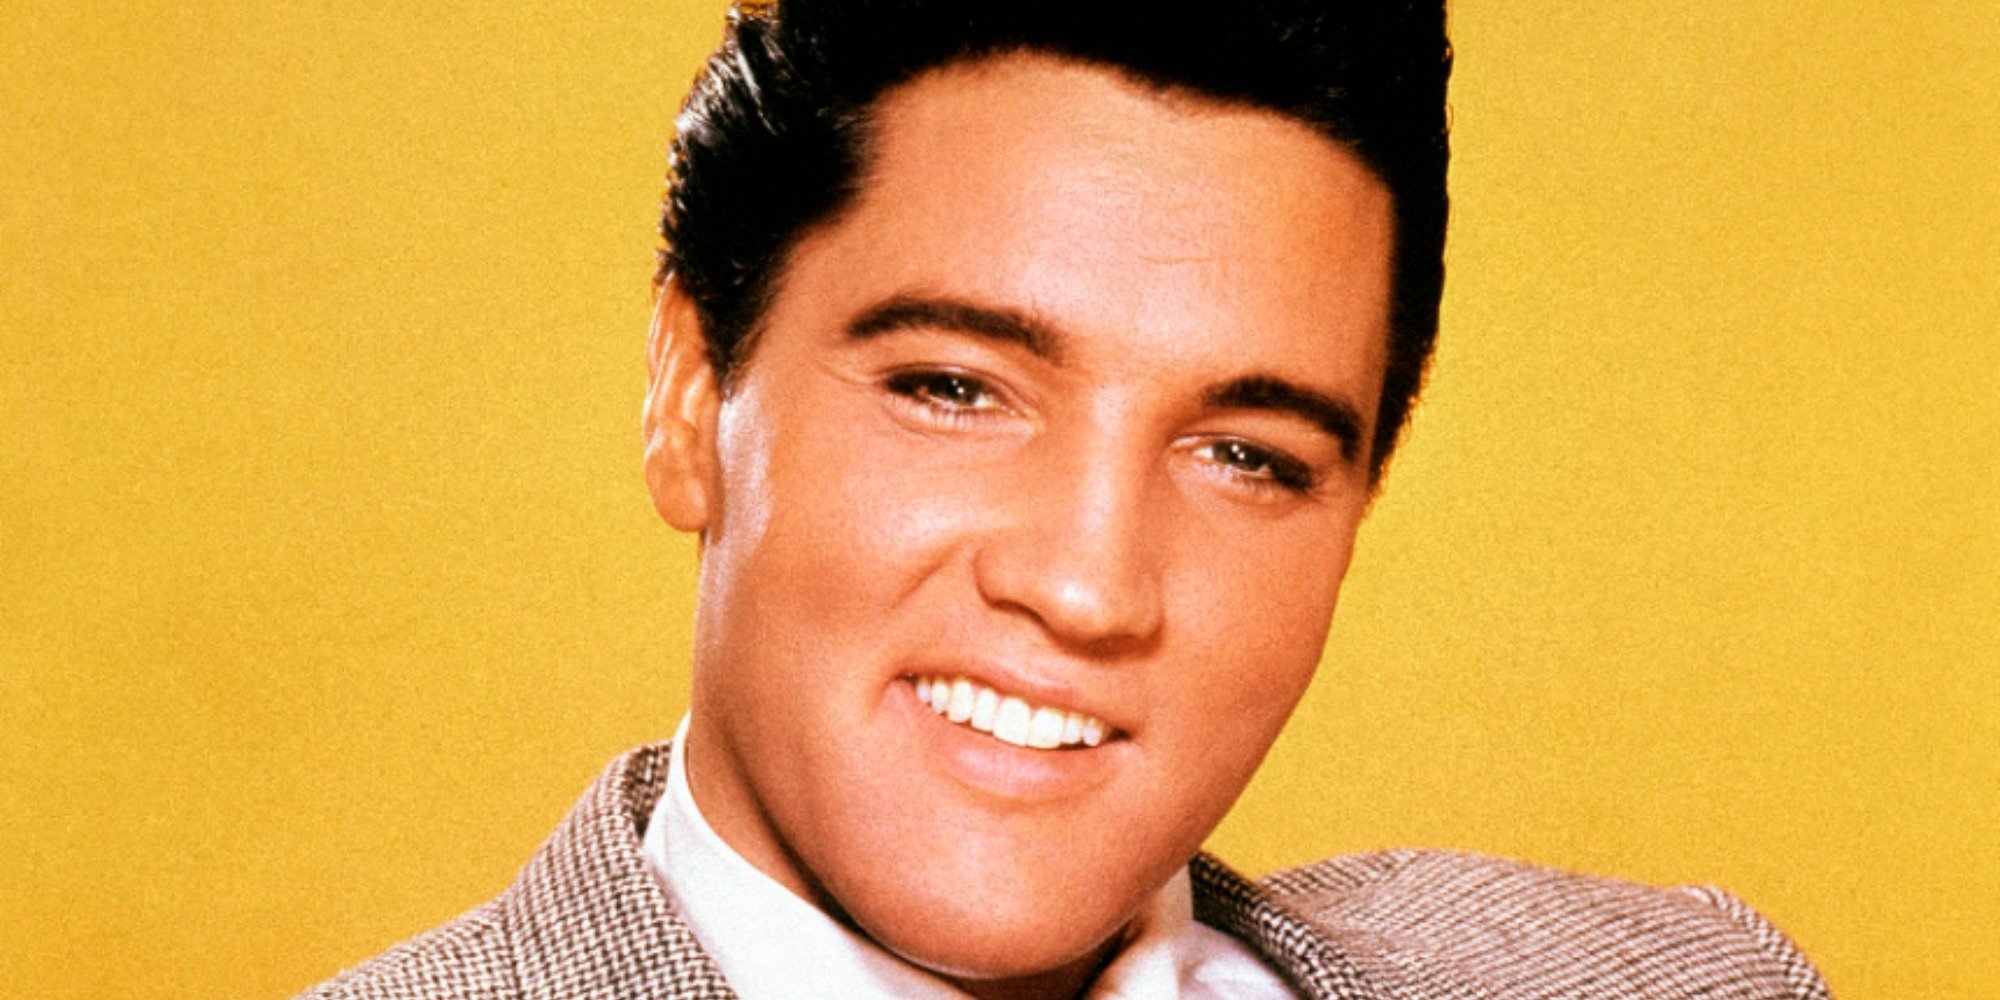 Elvis Presley in a press photograph with a bright yellow background.